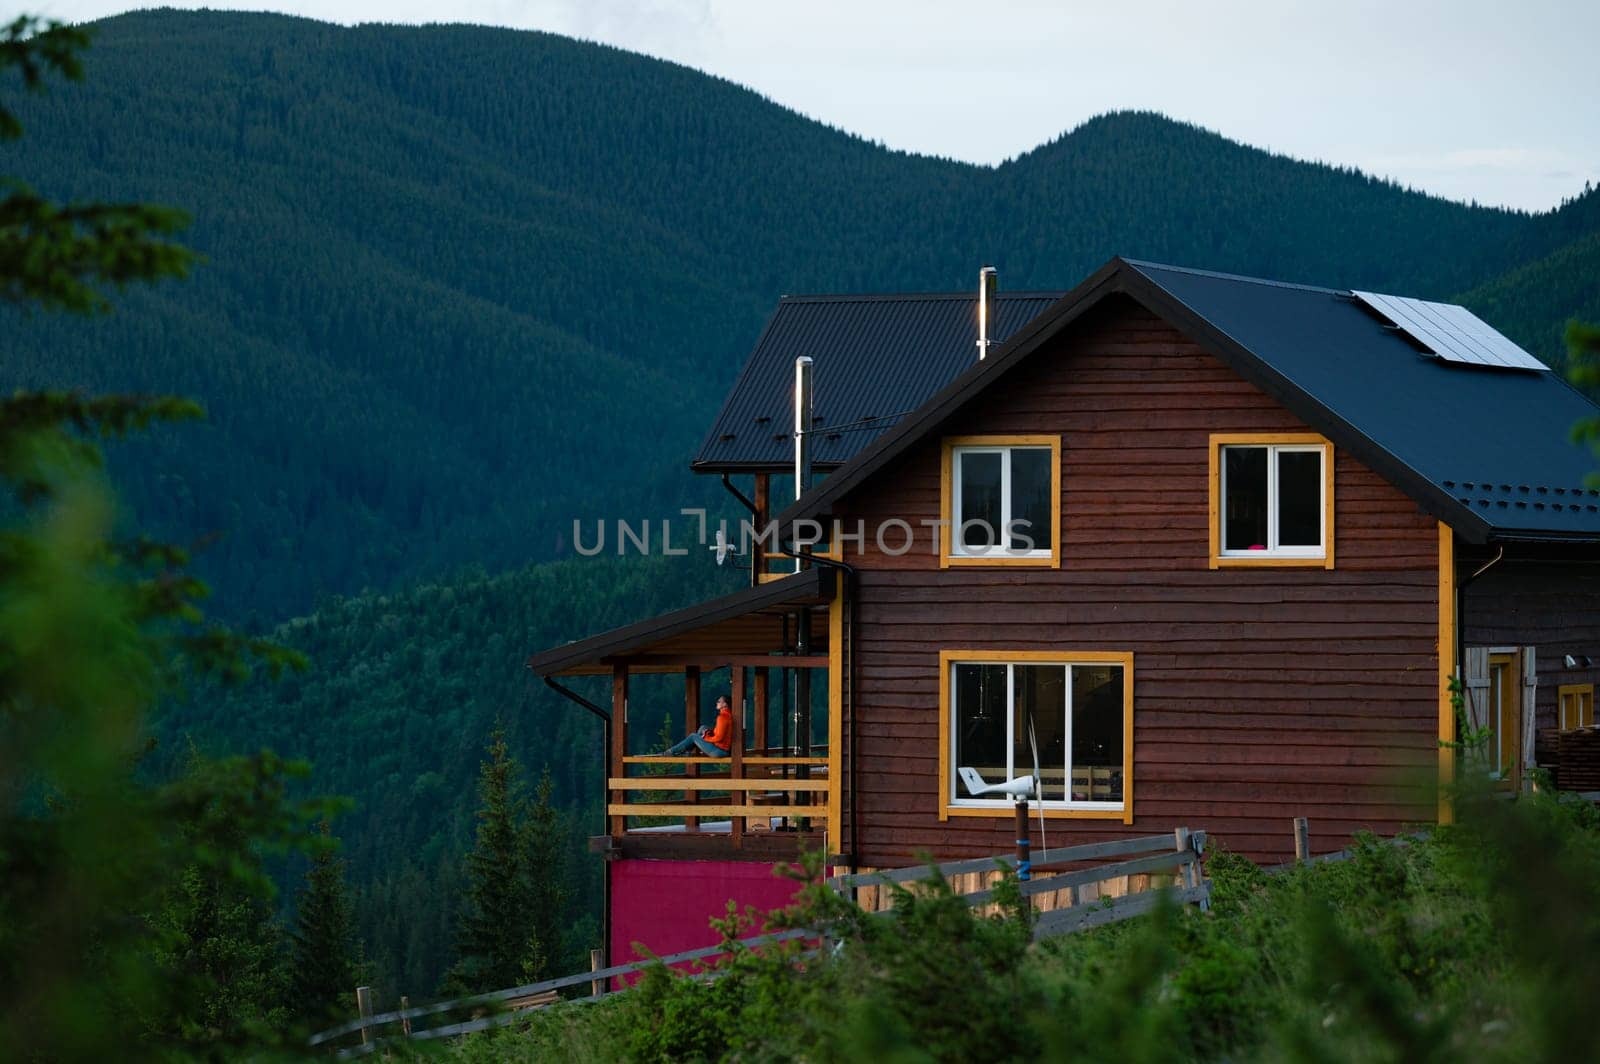 A large wooden house for tourists in the mountains, a young girl stands on the terrace against the background of the Carpathian mountains. by Niko_Cingaryuk